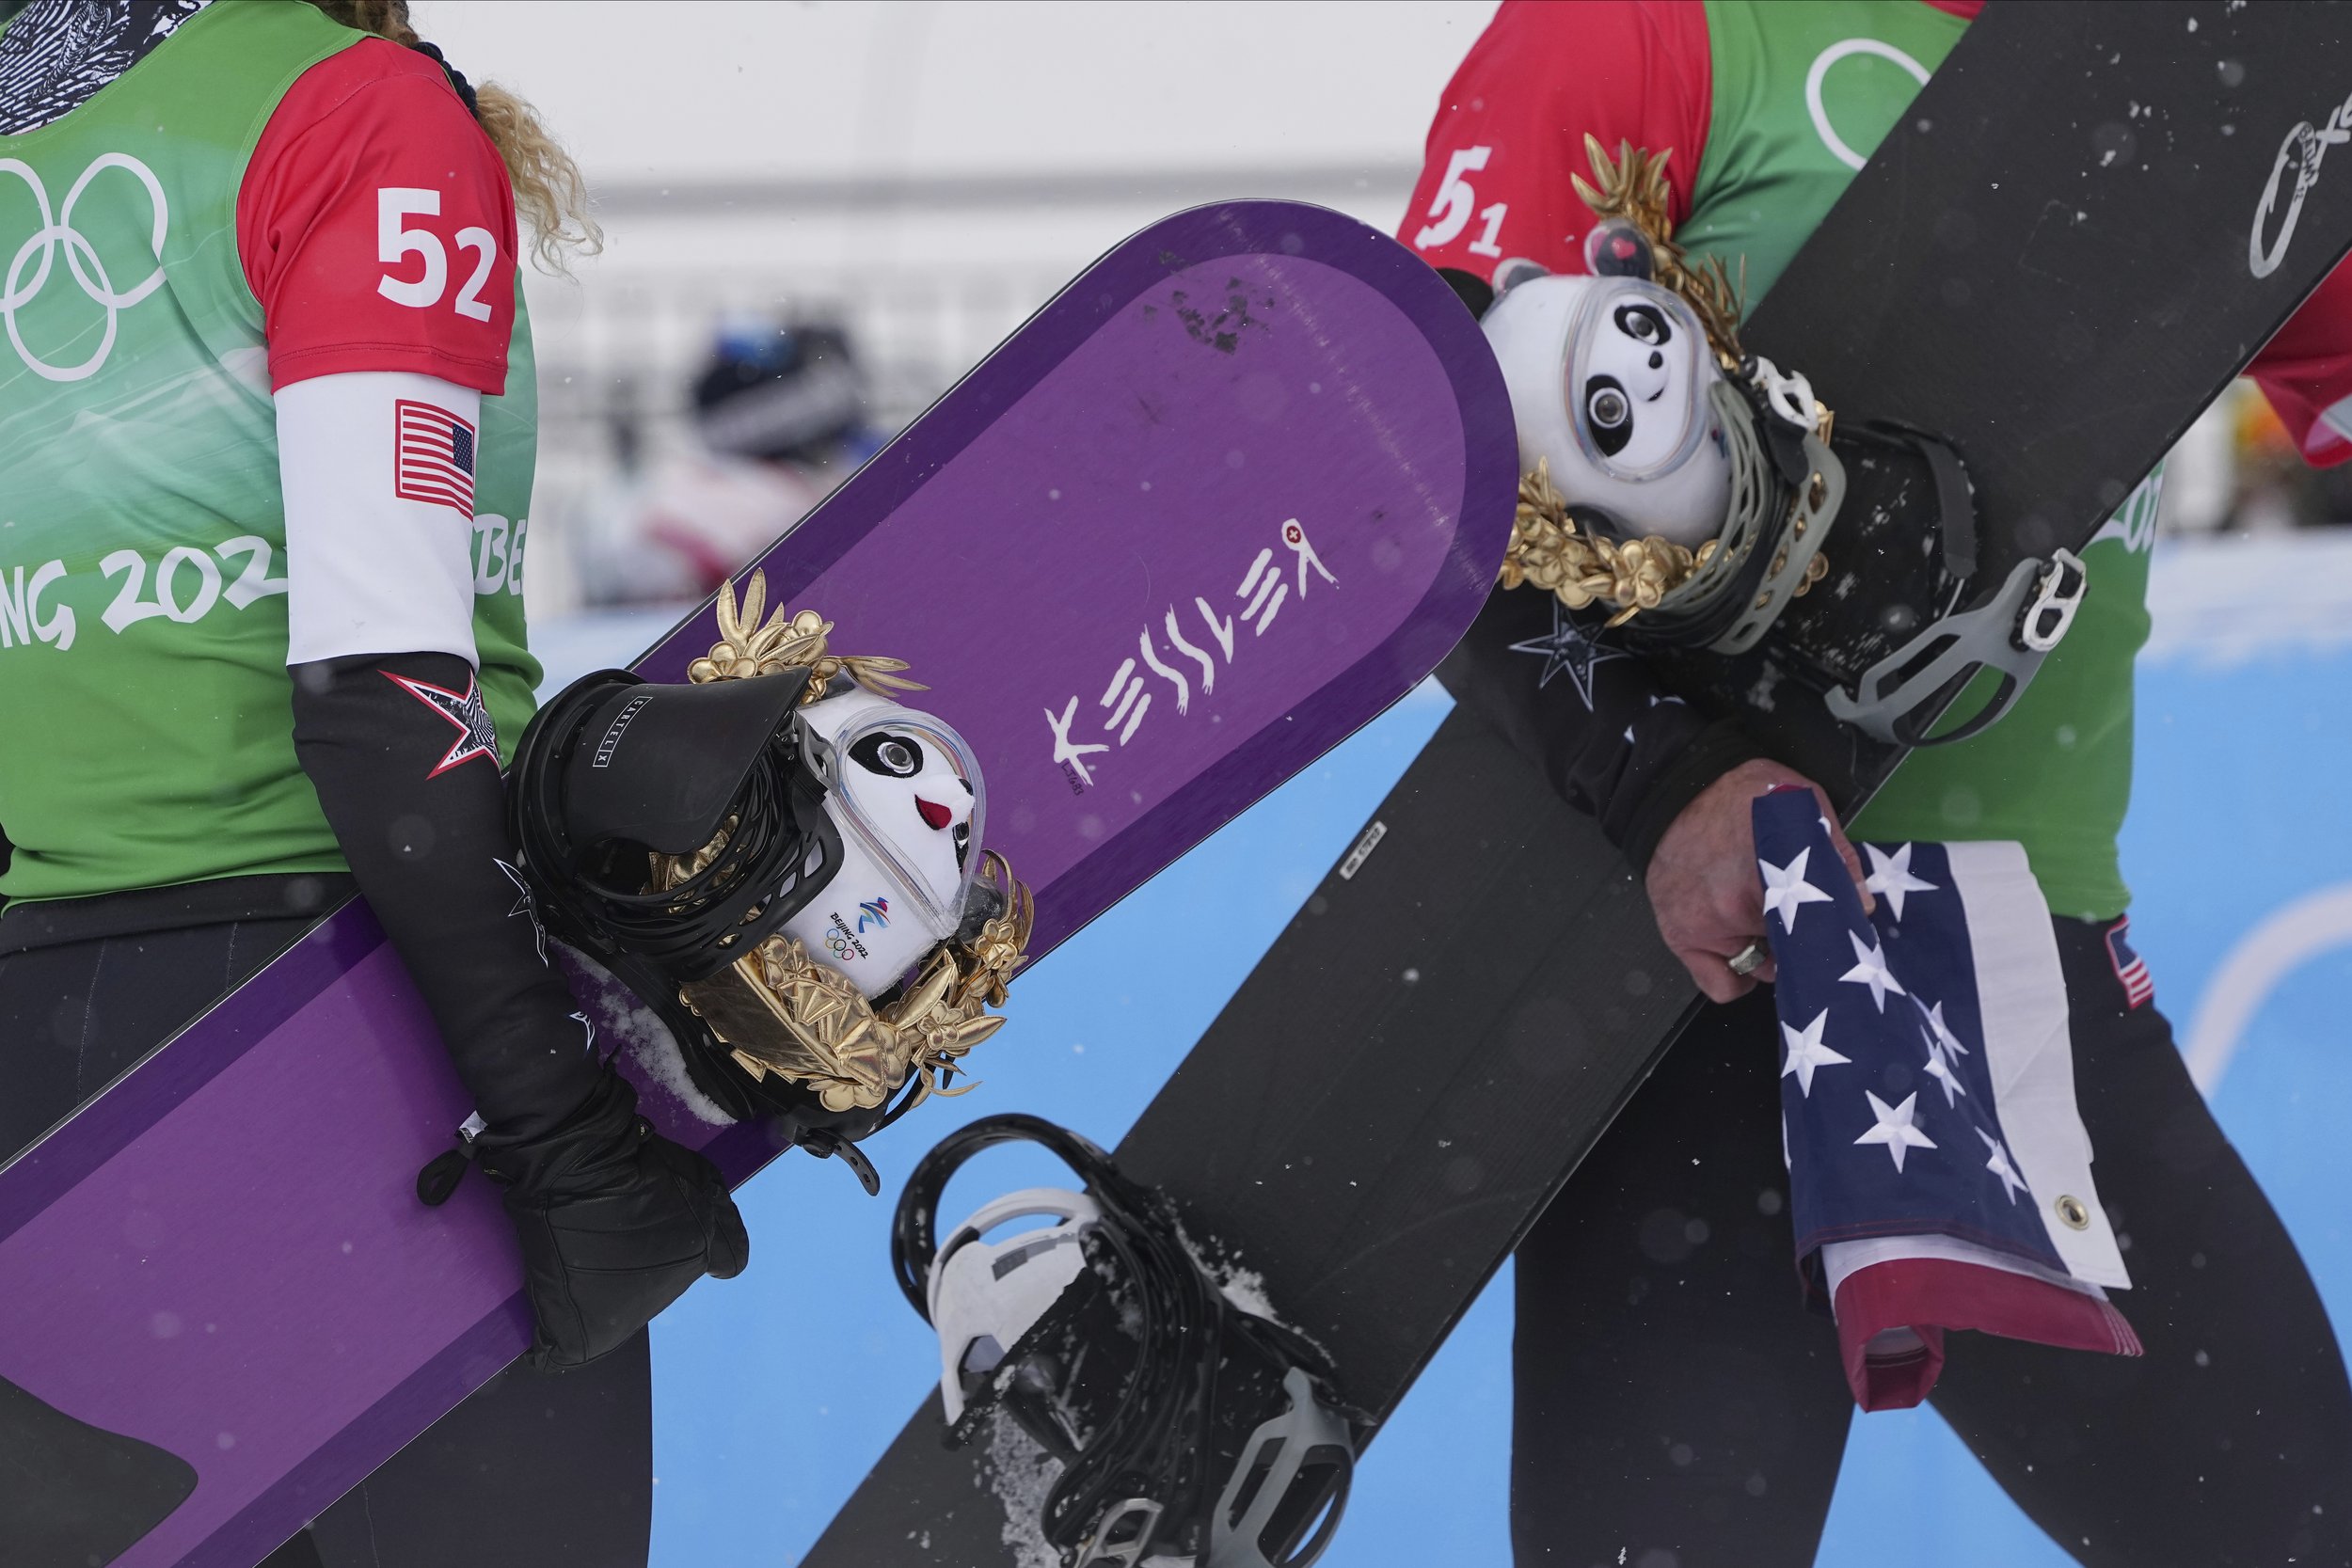  Gold medal winners United States' Lindsey Jacobellis and Nick Baumgartner walks off after the venue award ceremony for the mixed team snowboard cross finals at the 2022 Winter Olympics, Saturday, Feb. 12, 2022, in Zhangjiakou, China. (AP Photo/Grego